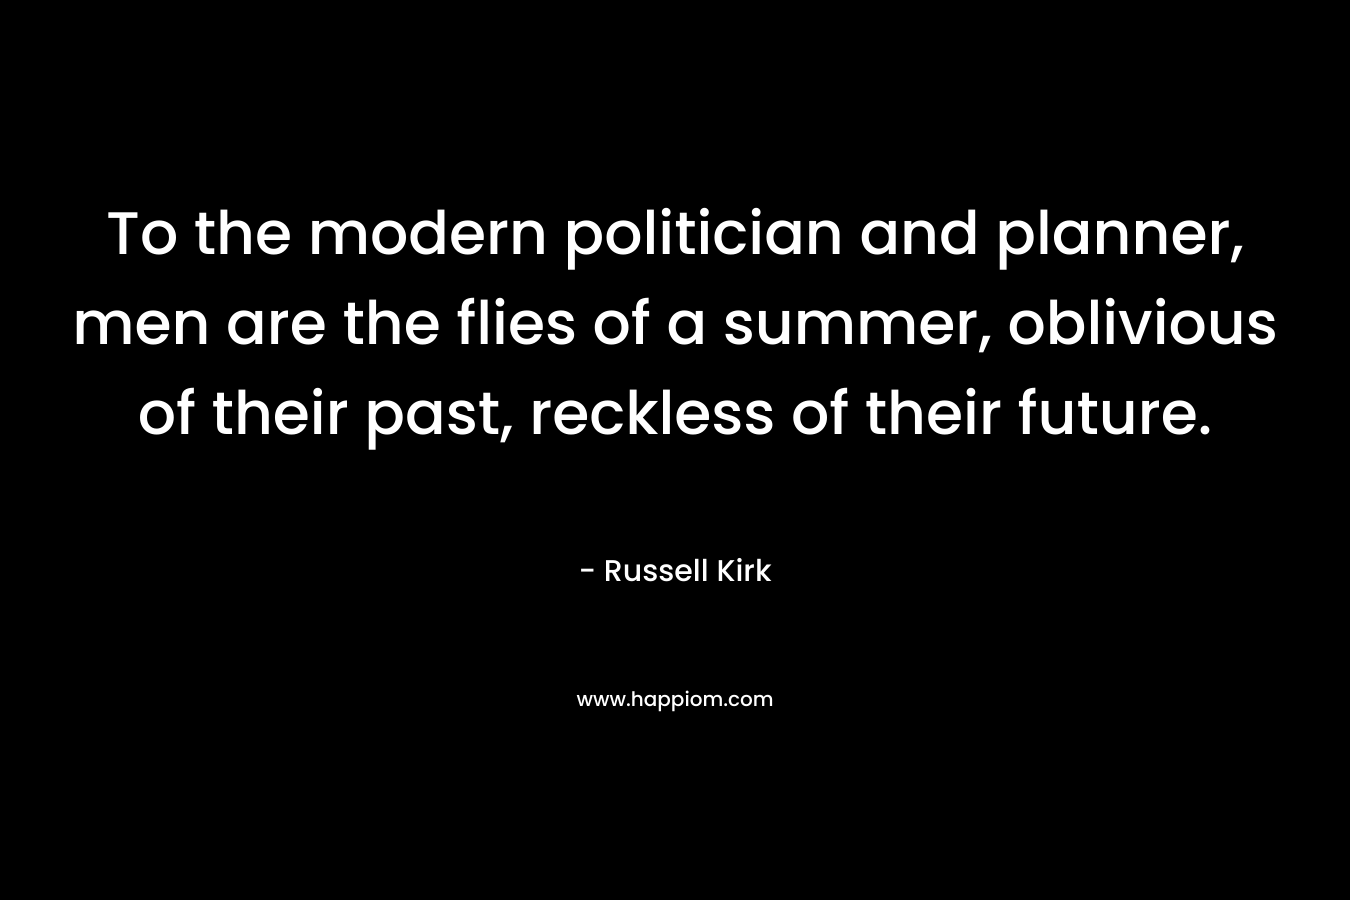 To the modern politician and planner, men are the flies of a summer, oblivious of their past, reckless of their future. – Russell Kirk